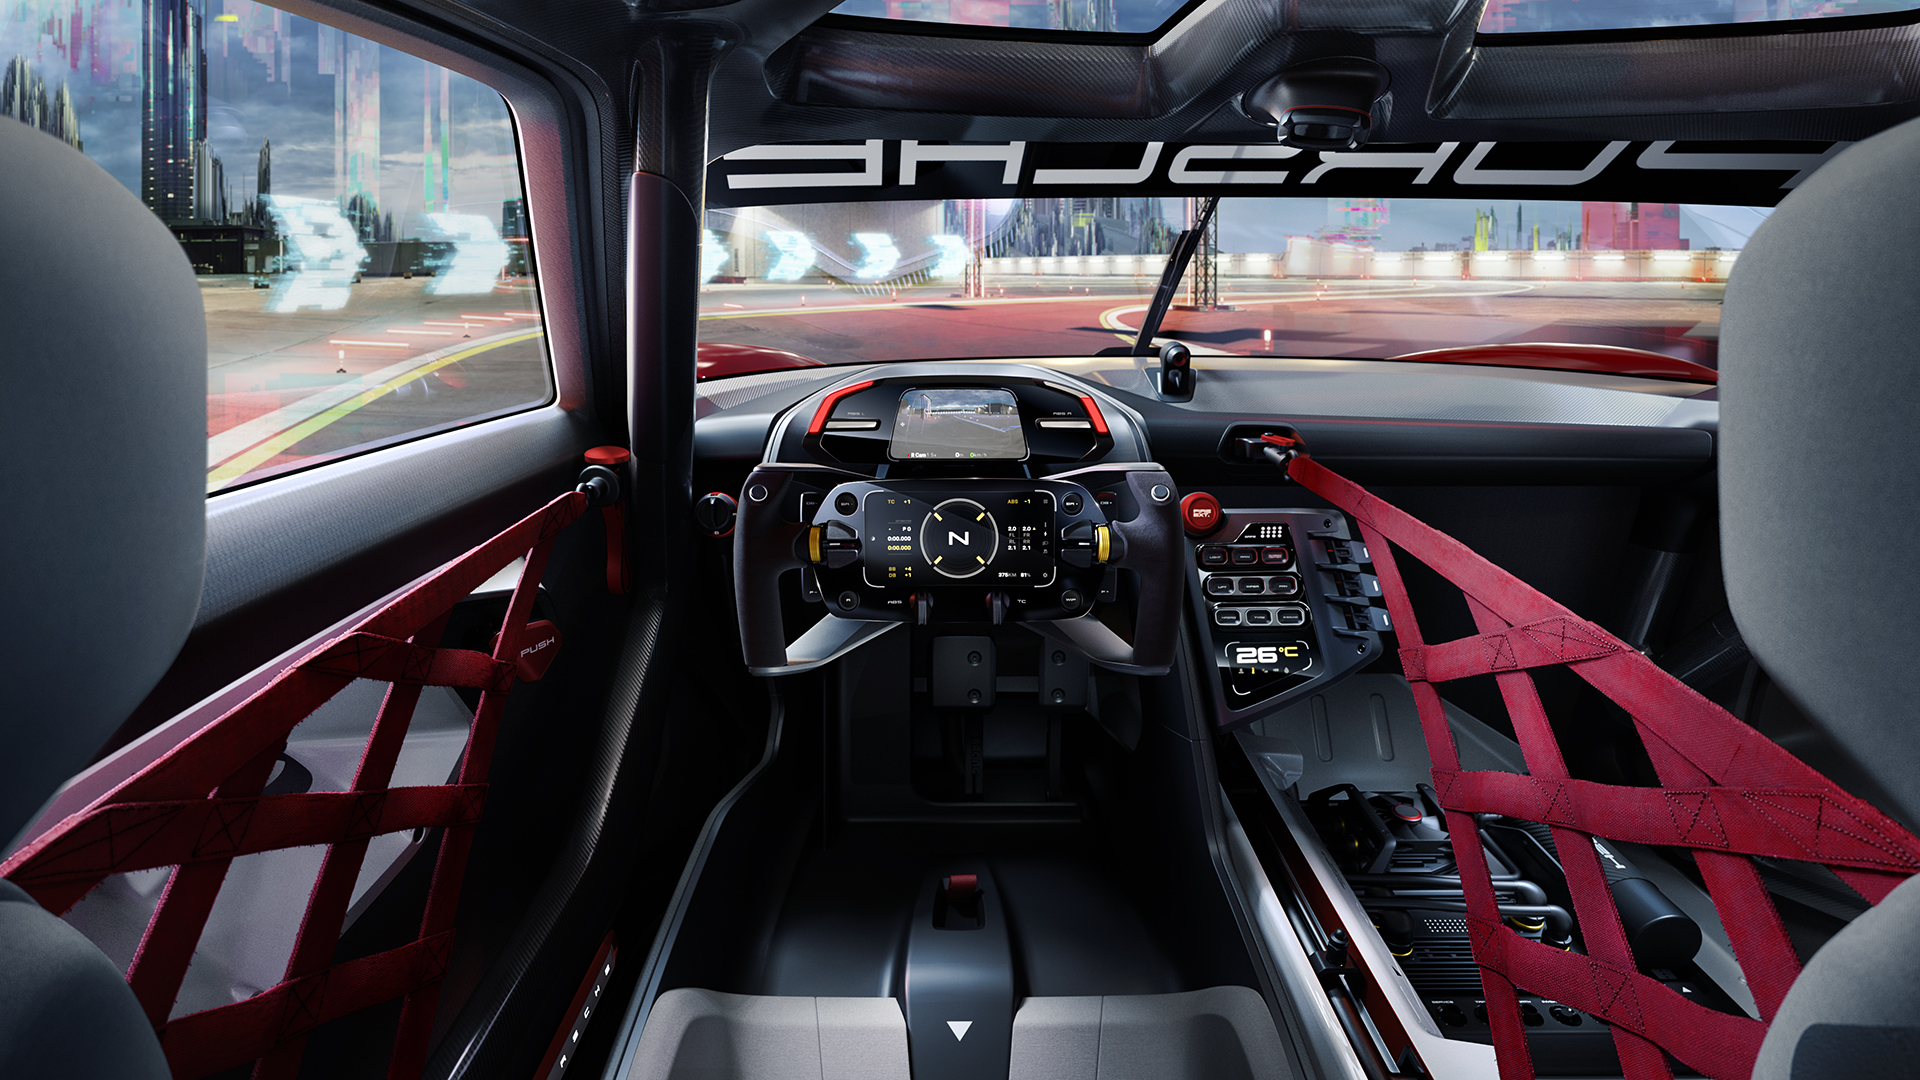 Inside Mission R concept racecar showing gamer-style steering wheel